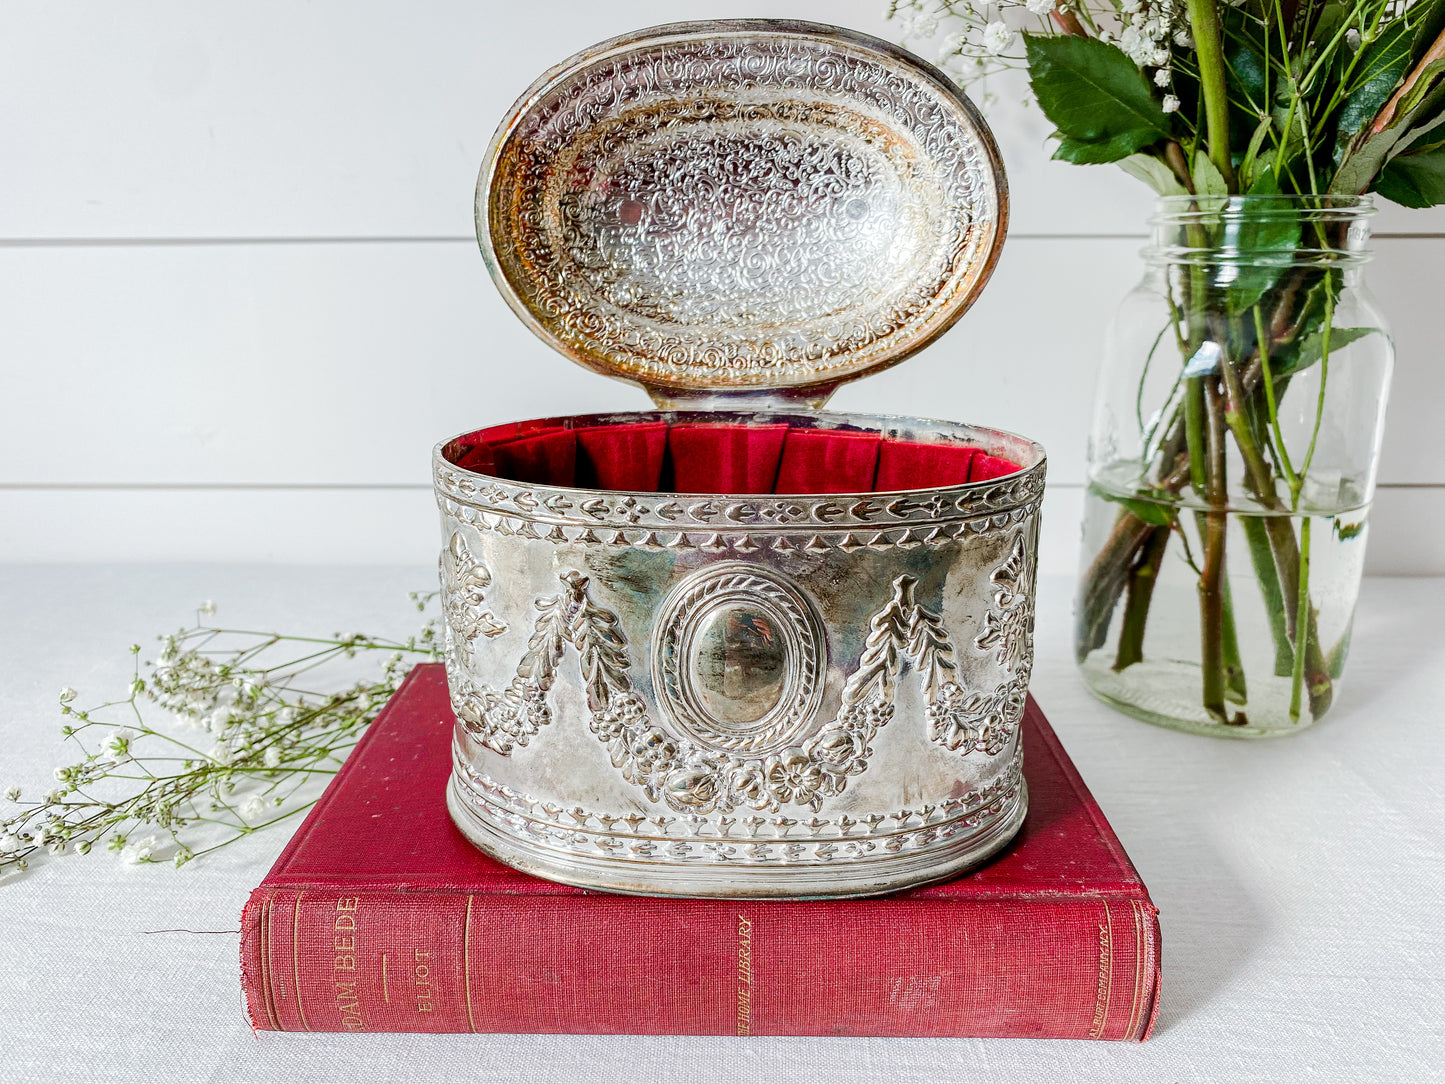 Vintage Silverplate Trinket Jewelry Box with Red Velvet Lining, Gift Presentation Box with Hinged Lid